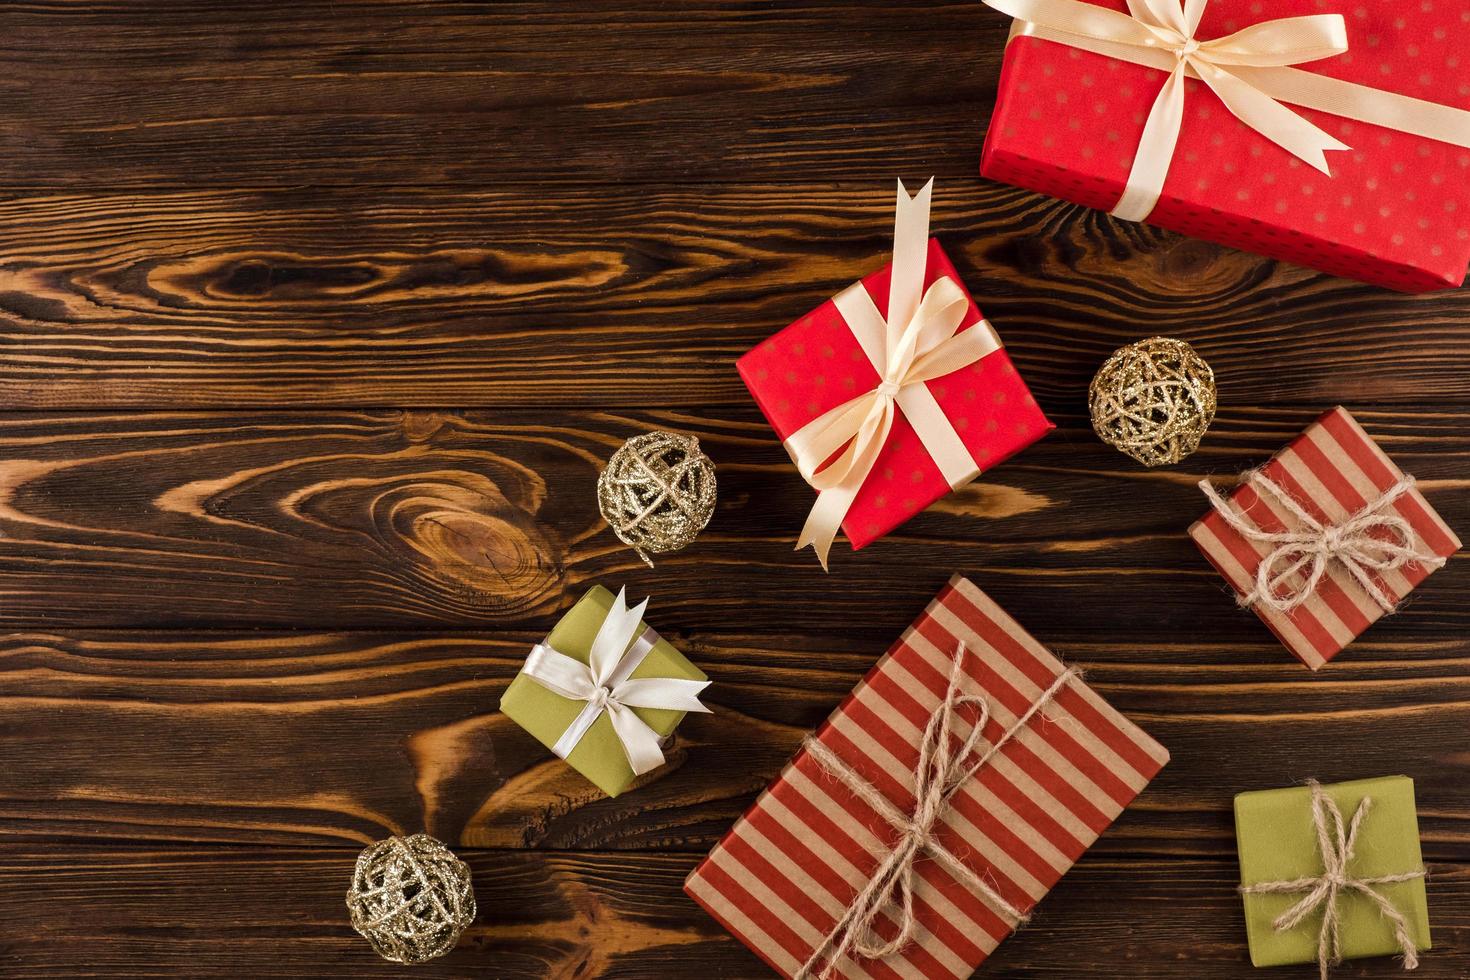 Gifts on wooden background, top view photo